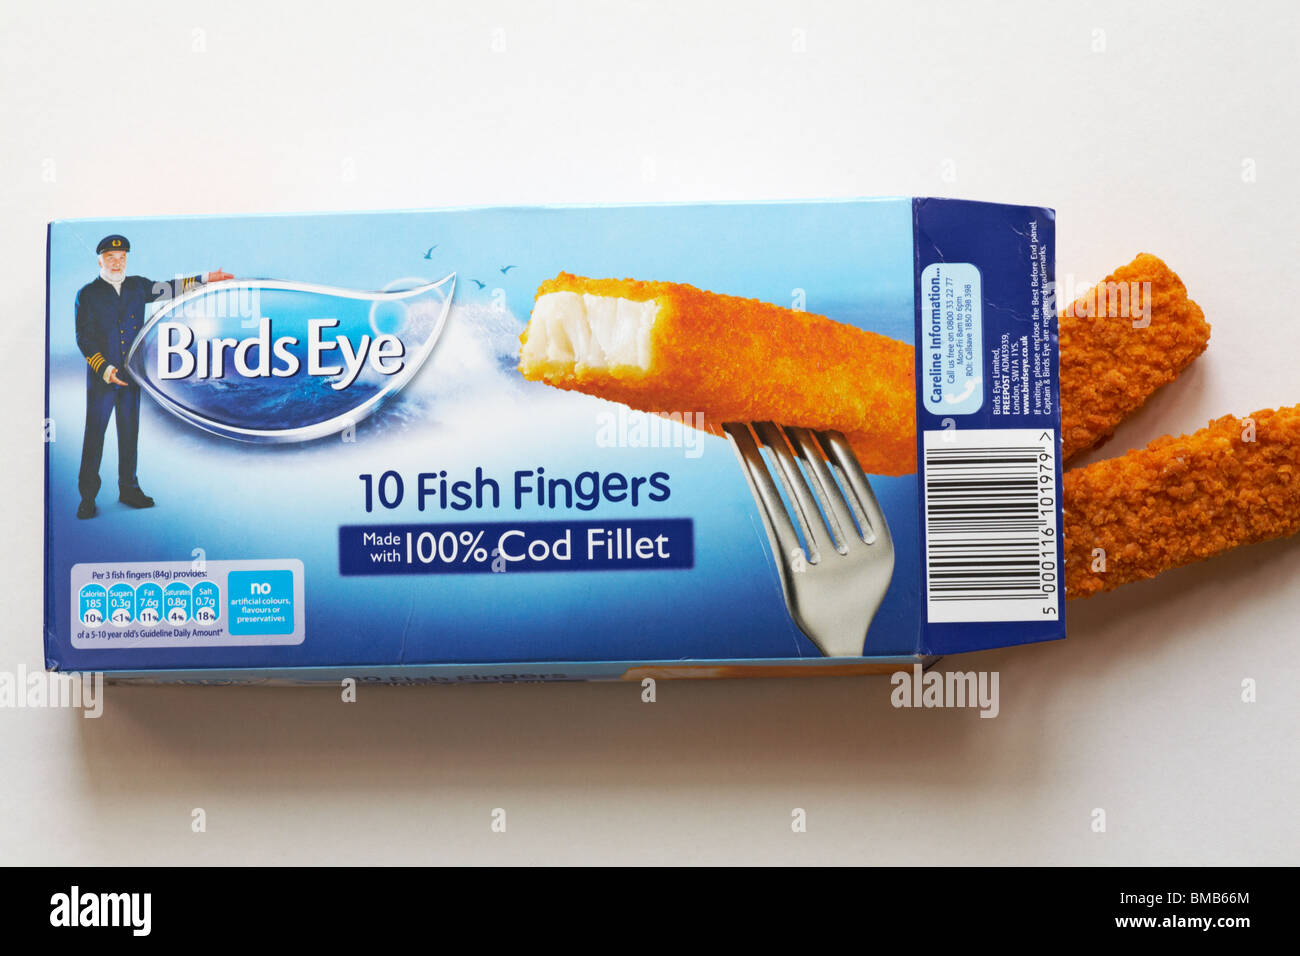 Packet of opened Birds Eye Fish Fingers showing contents - Birdseye fish  fingers made with 100% cod fillet Stock Photo - Alamy